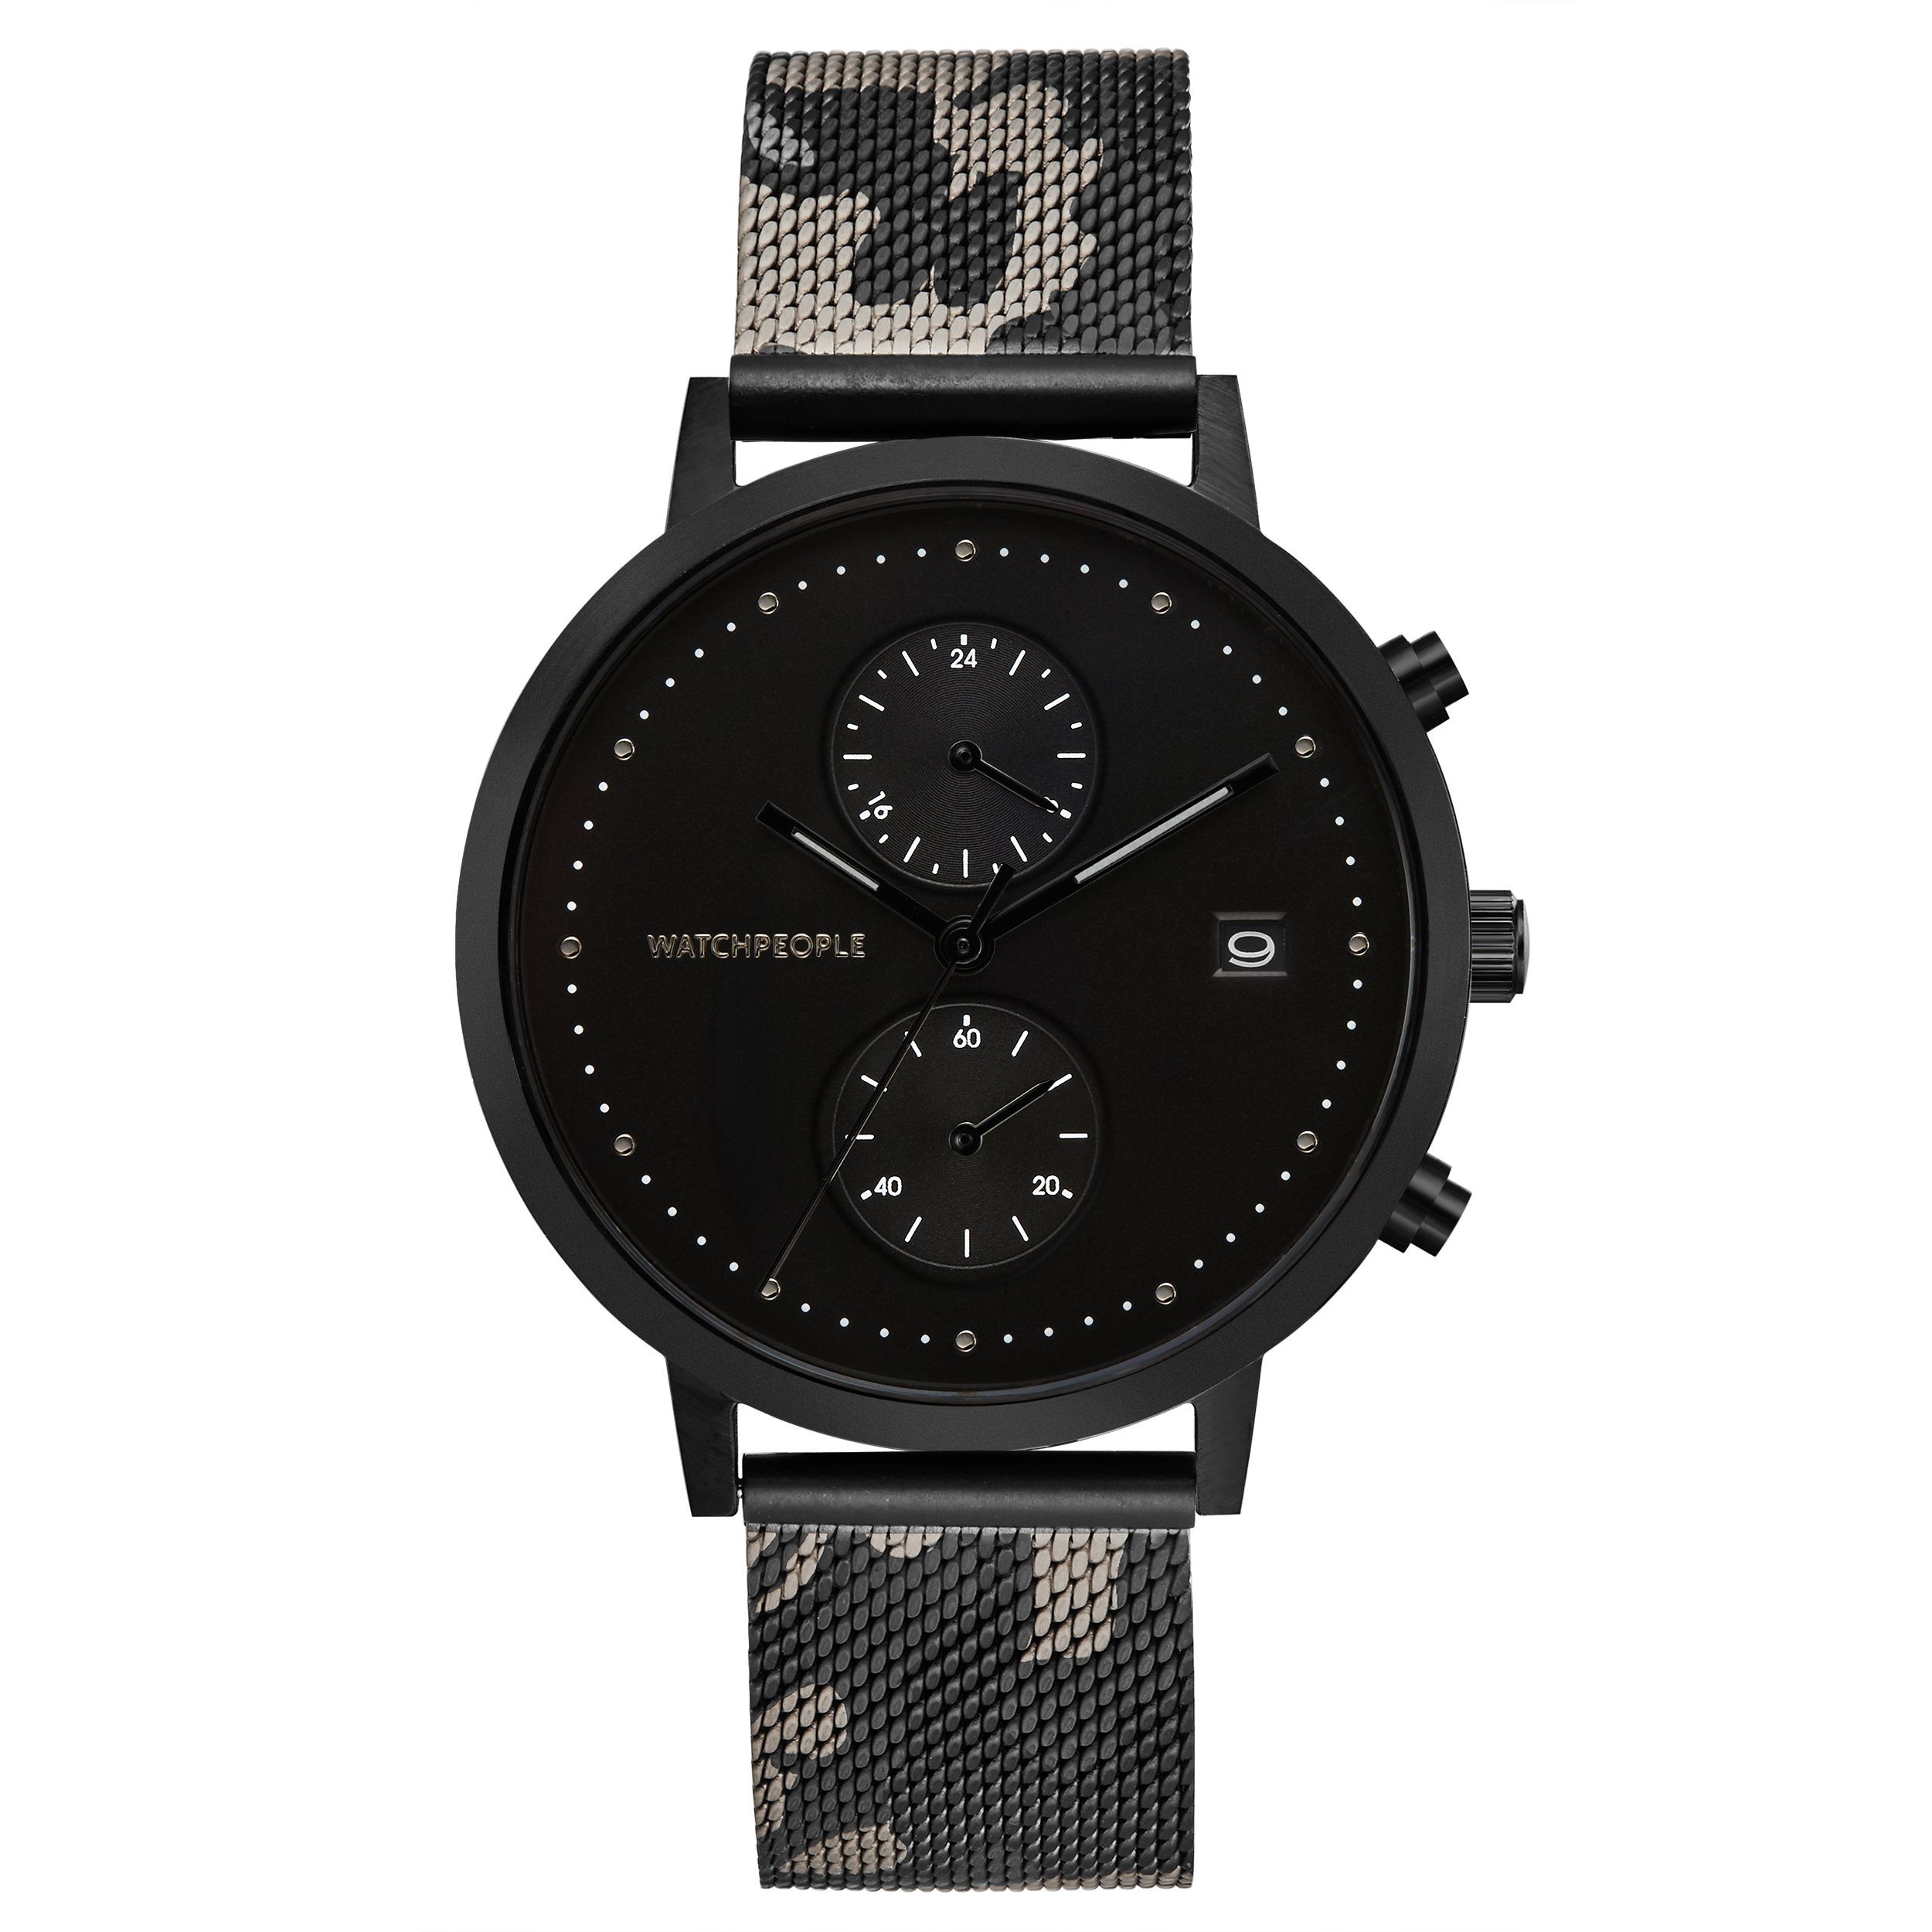 Watchpeople Multifunktionsuhr Cosmo Black WP 049-03, flach, Datumsanzeige, Dual-Time, easy release Band